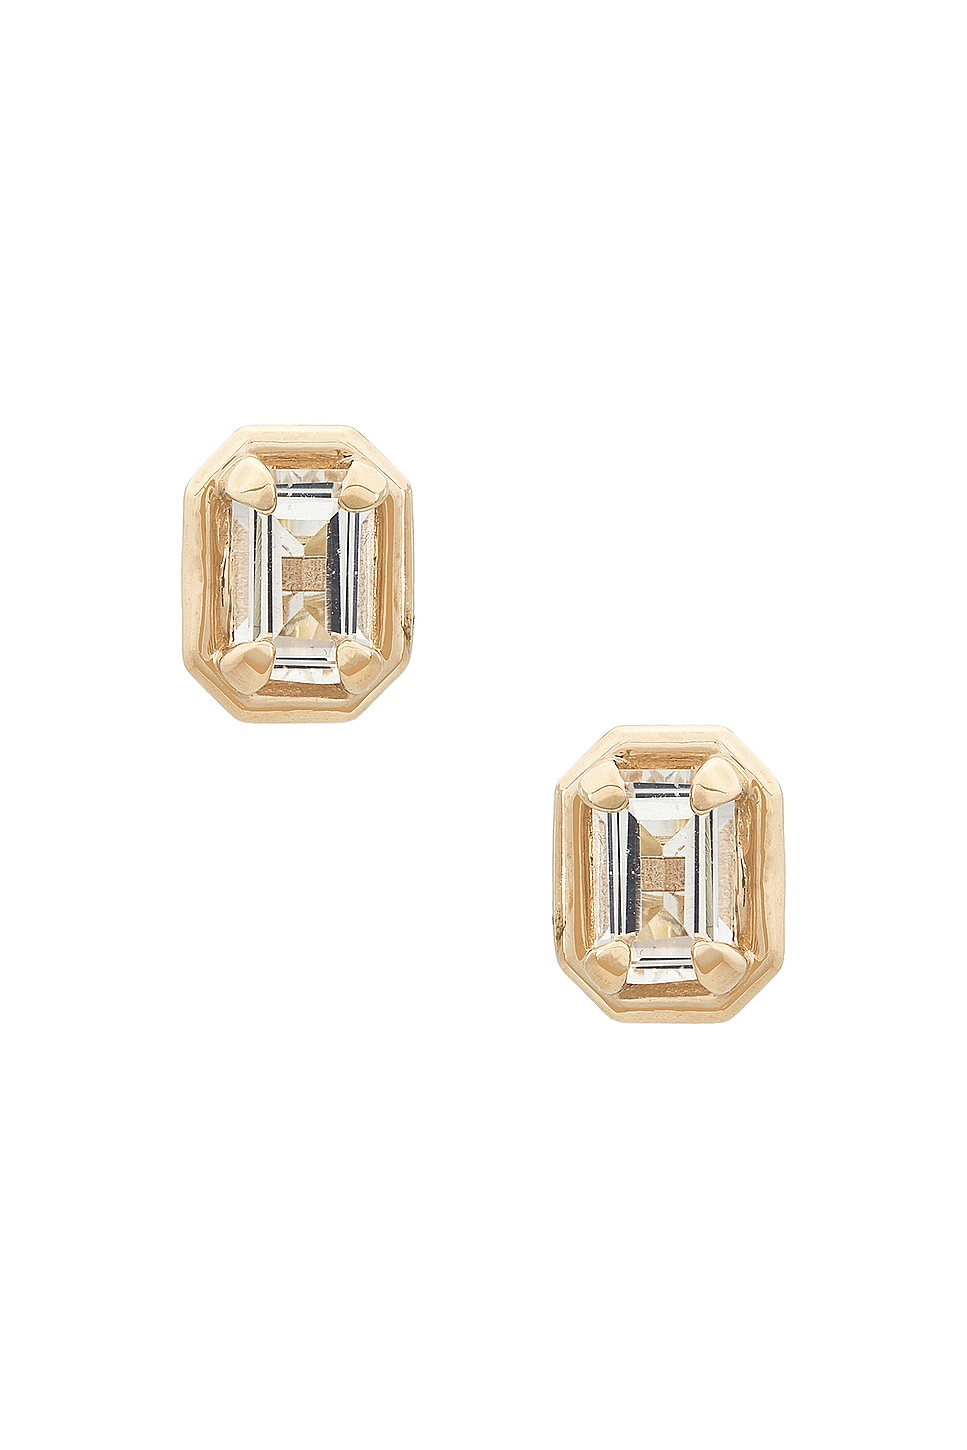 Image 1 of STONE AND STRAND Bonbon Emerald Cut Stud Earrings In 14k Yellow Gold & White Topaz in 14k Yellow Gold & White Topaz